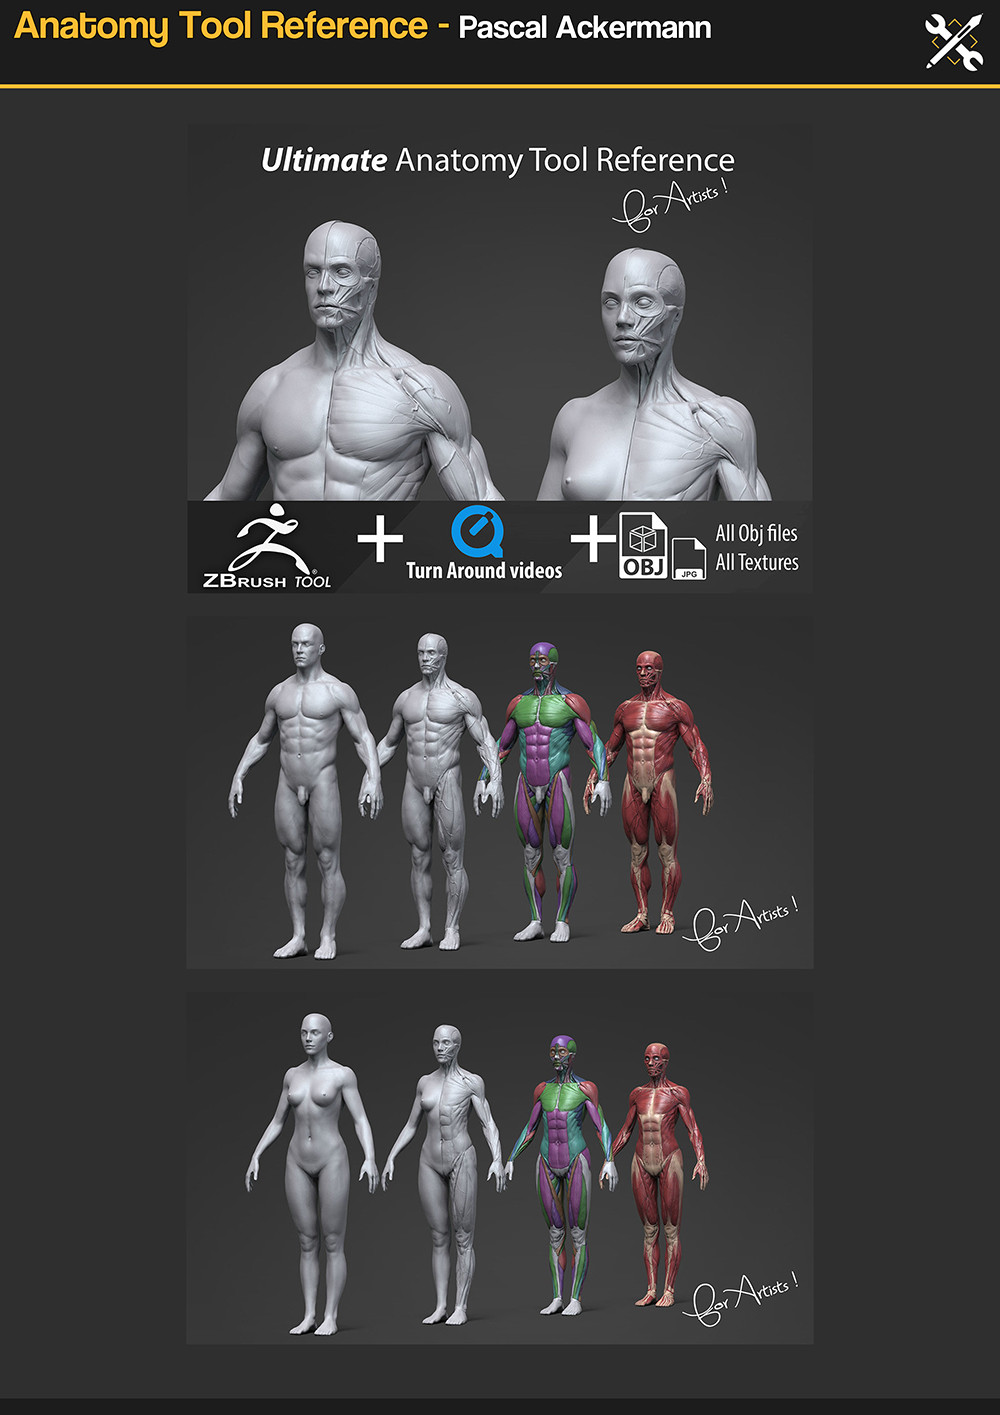 Anatomy Tool Reference - https://gumroad.com/a/224212083